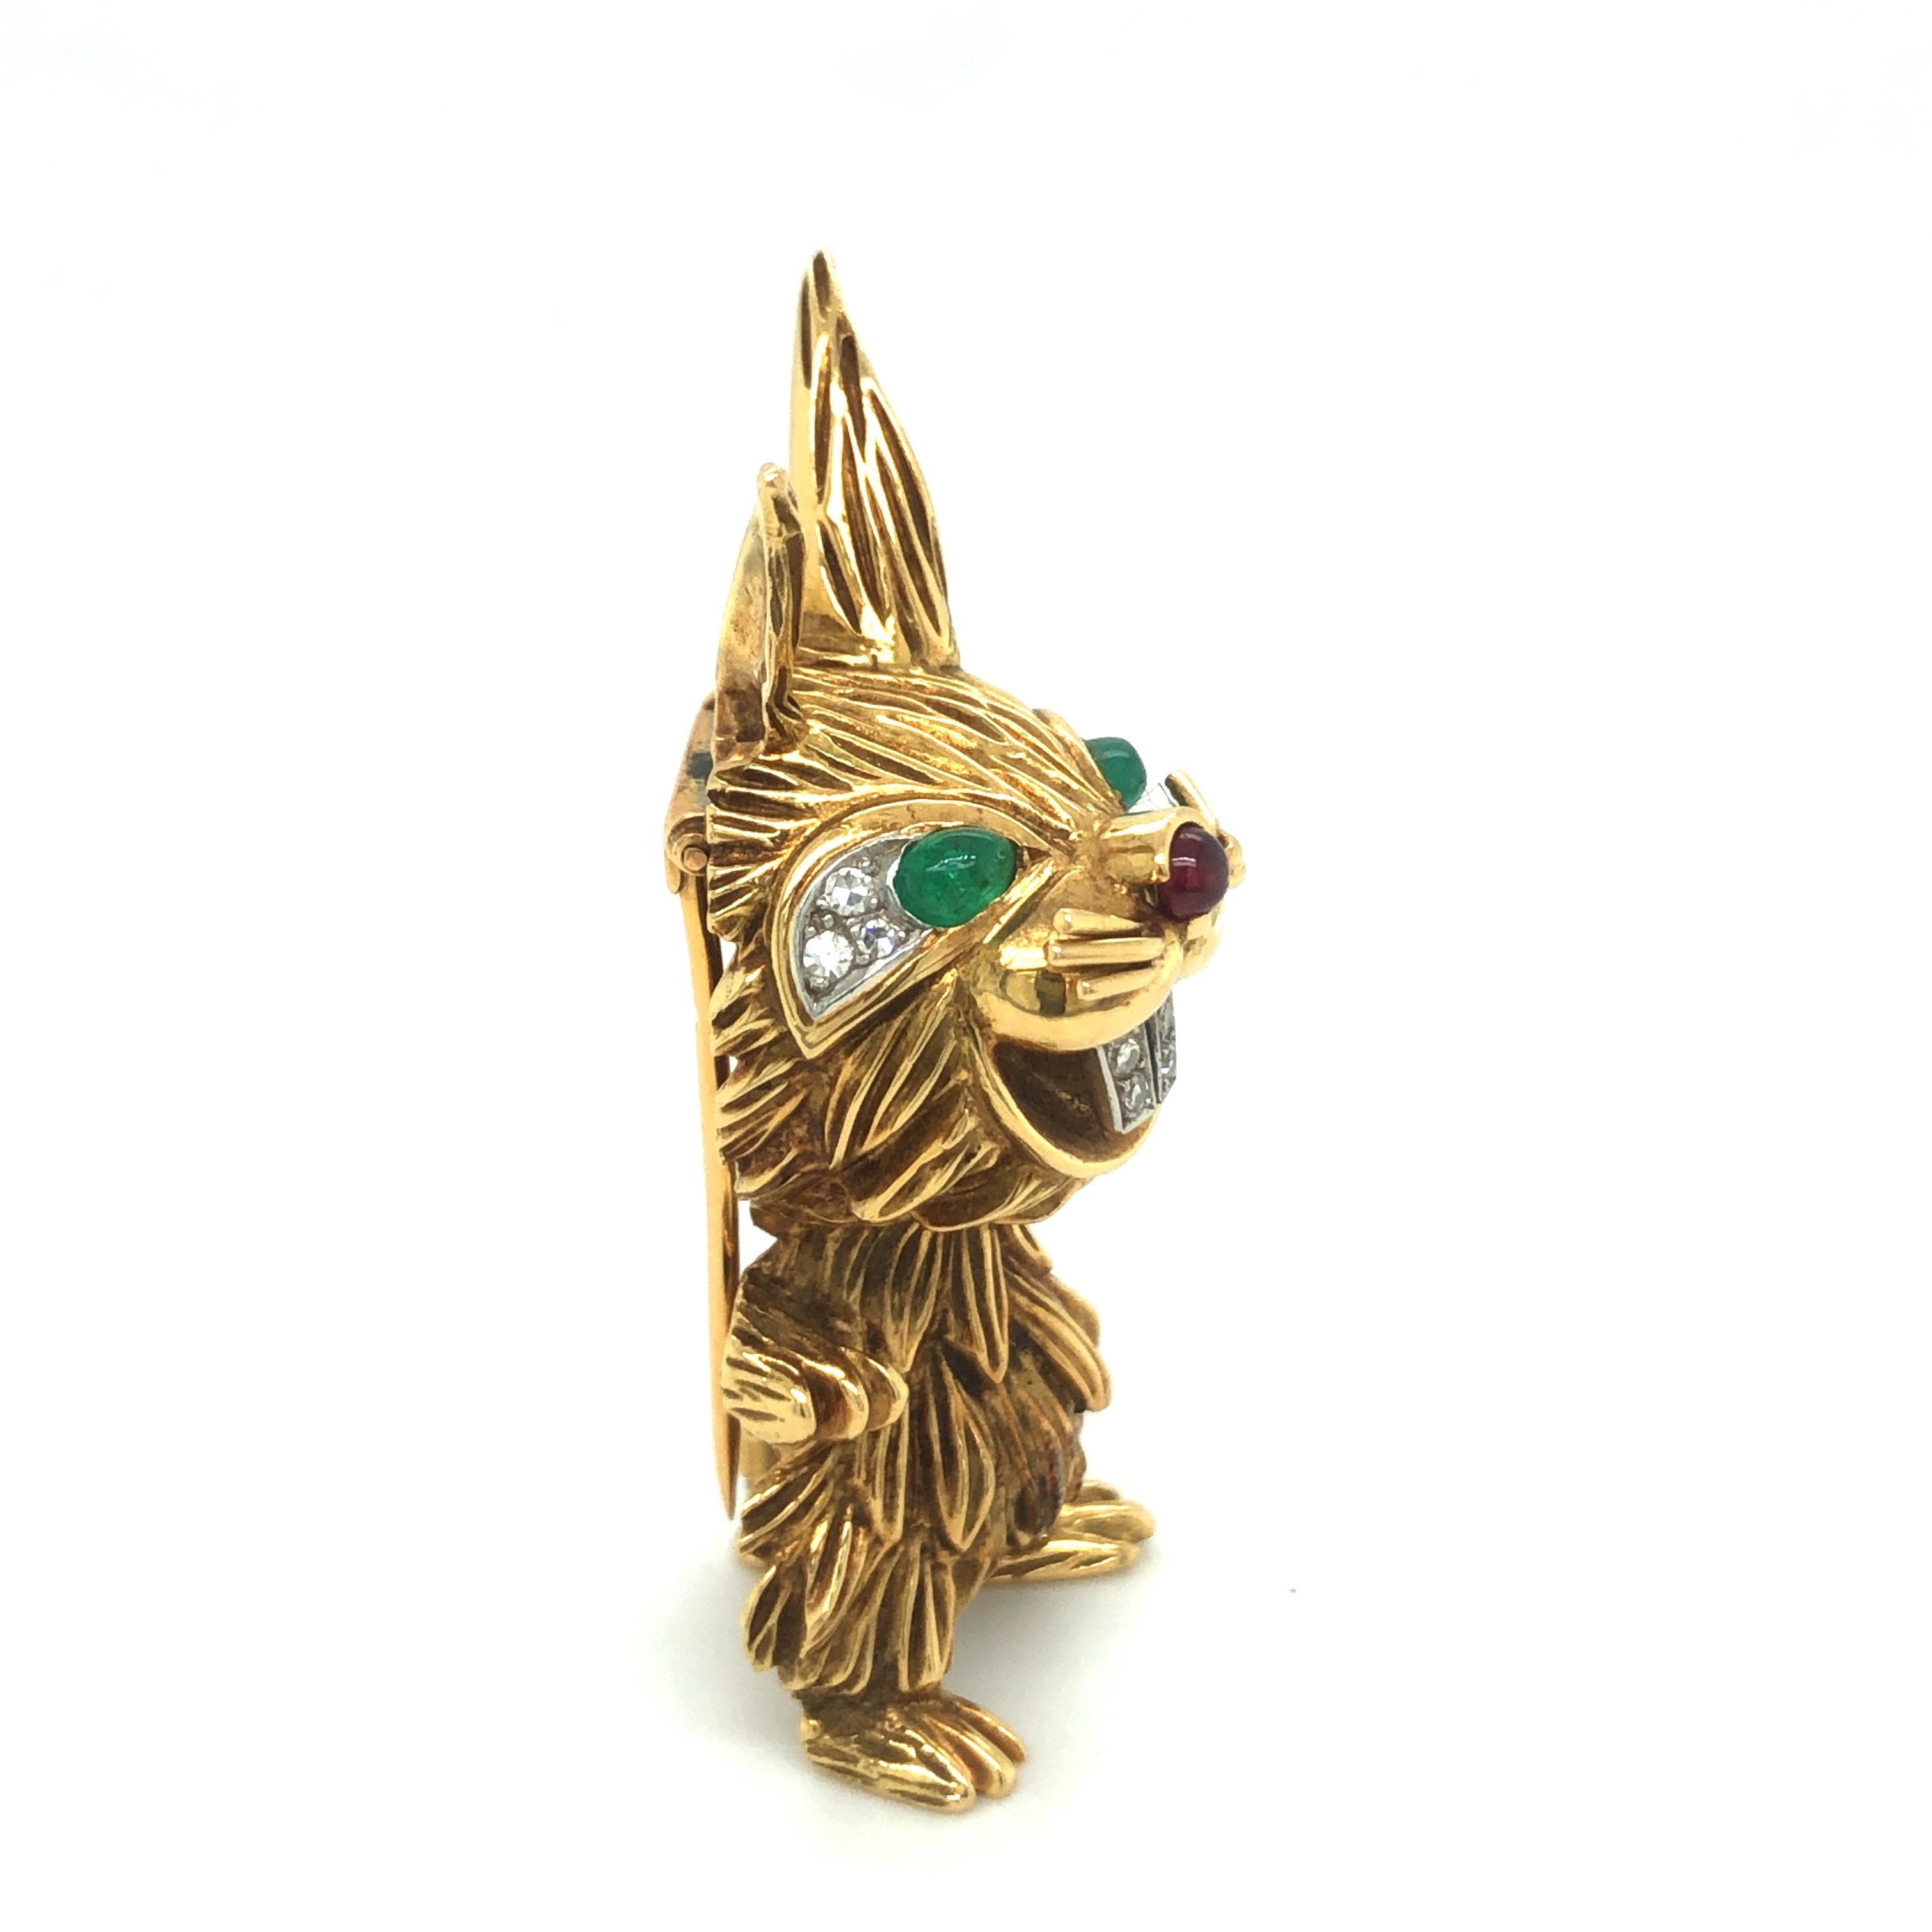 Hilarious 18 karat yellow gold single-cut diamond emerald ruby rabbit brooch of French provenance, circa 1960s.
Depicting a cheerful standing rabbit with head and body crafted in high relief, tousled fur and lop-ears, emerald and pavé-set diamond